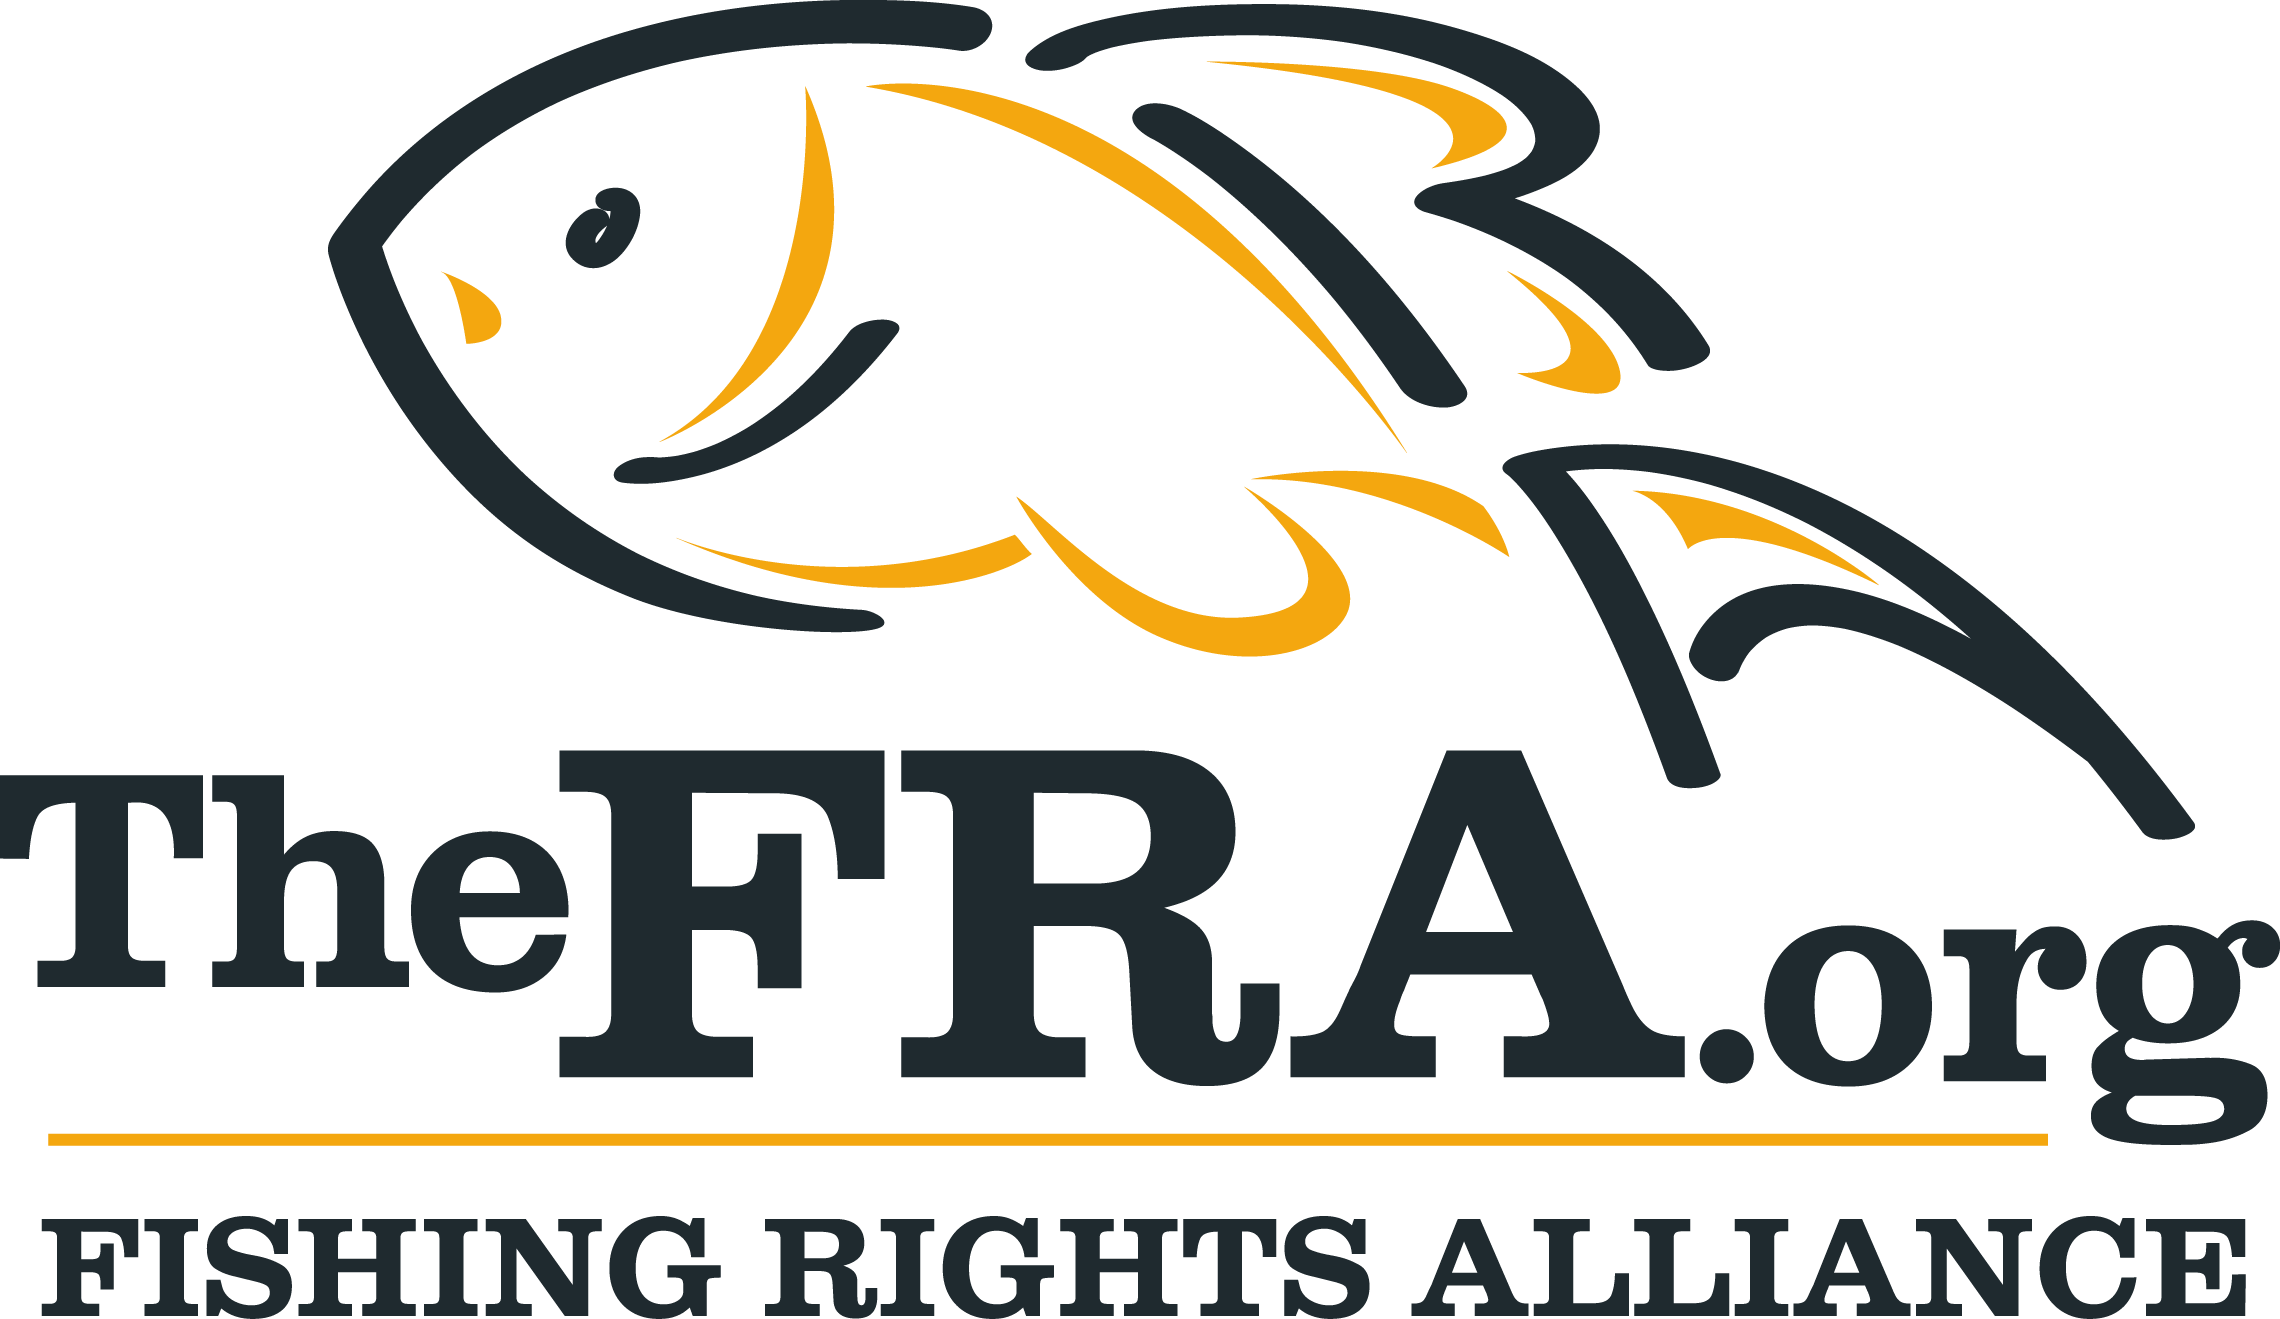 FISHING RIGHTS ALLIANCE